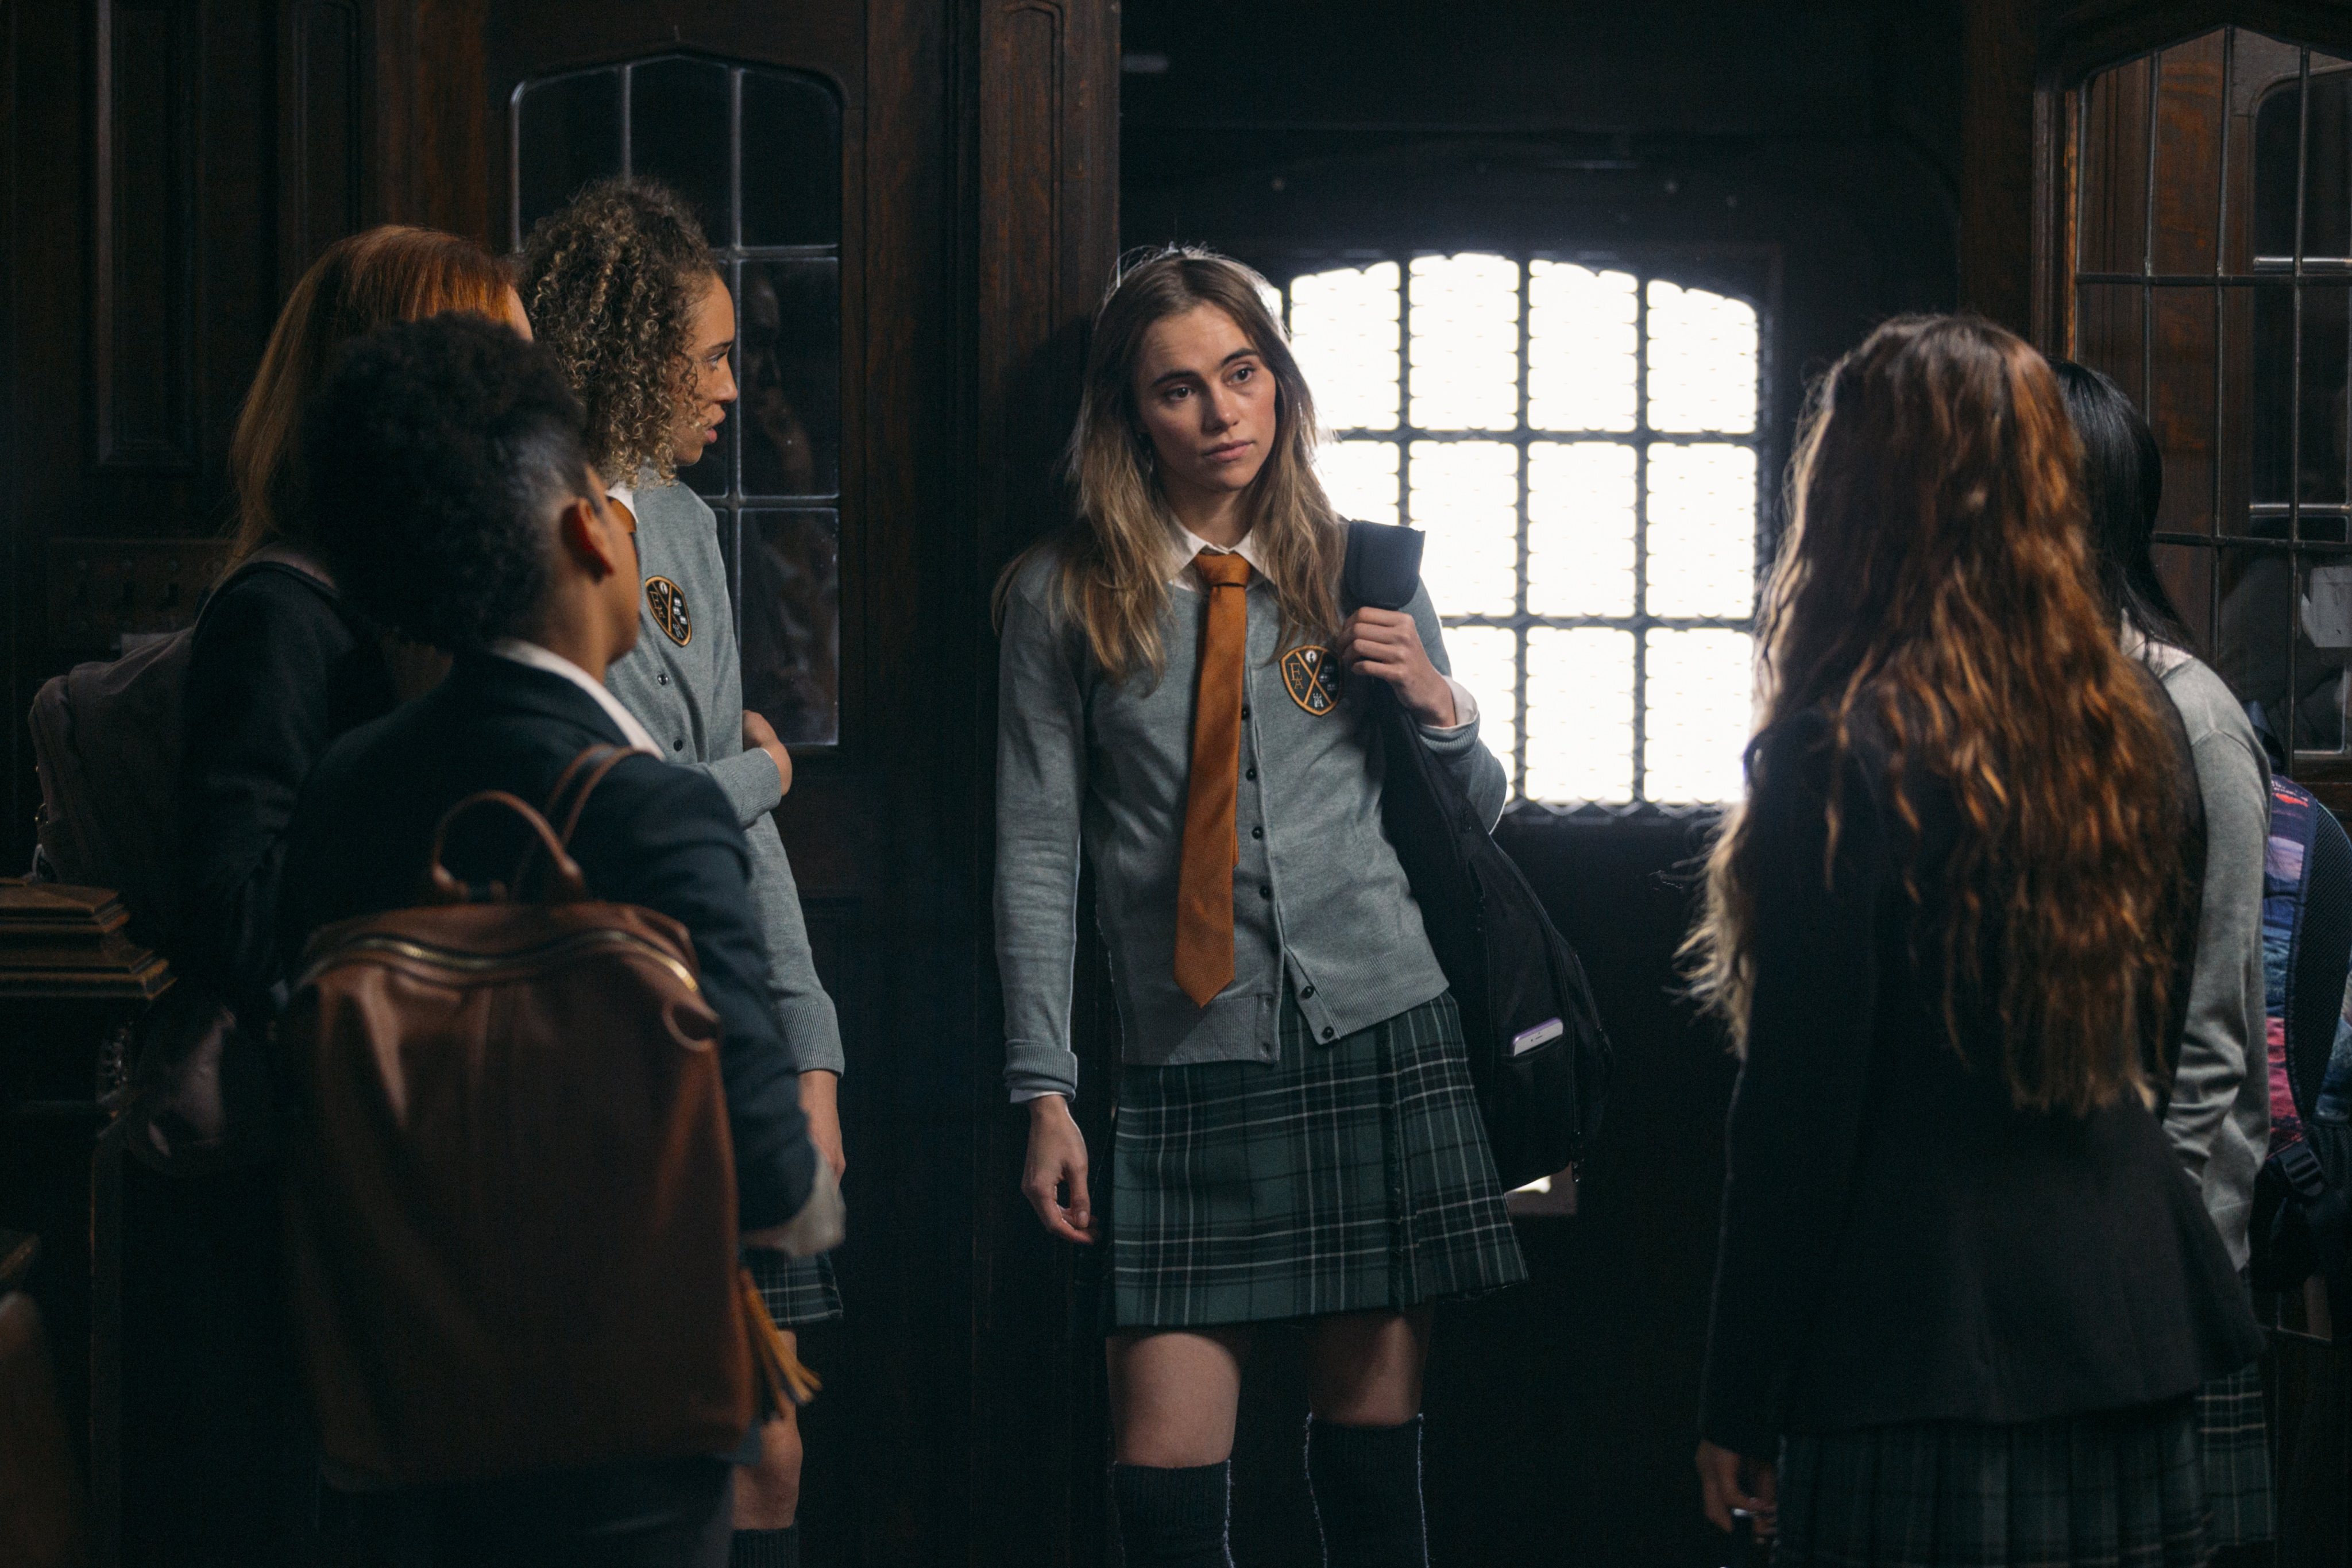 Seance movie review: boarding school slasher starring Suki Waterhouse offers a stylish rehash of classic horrors | South China Morning Post